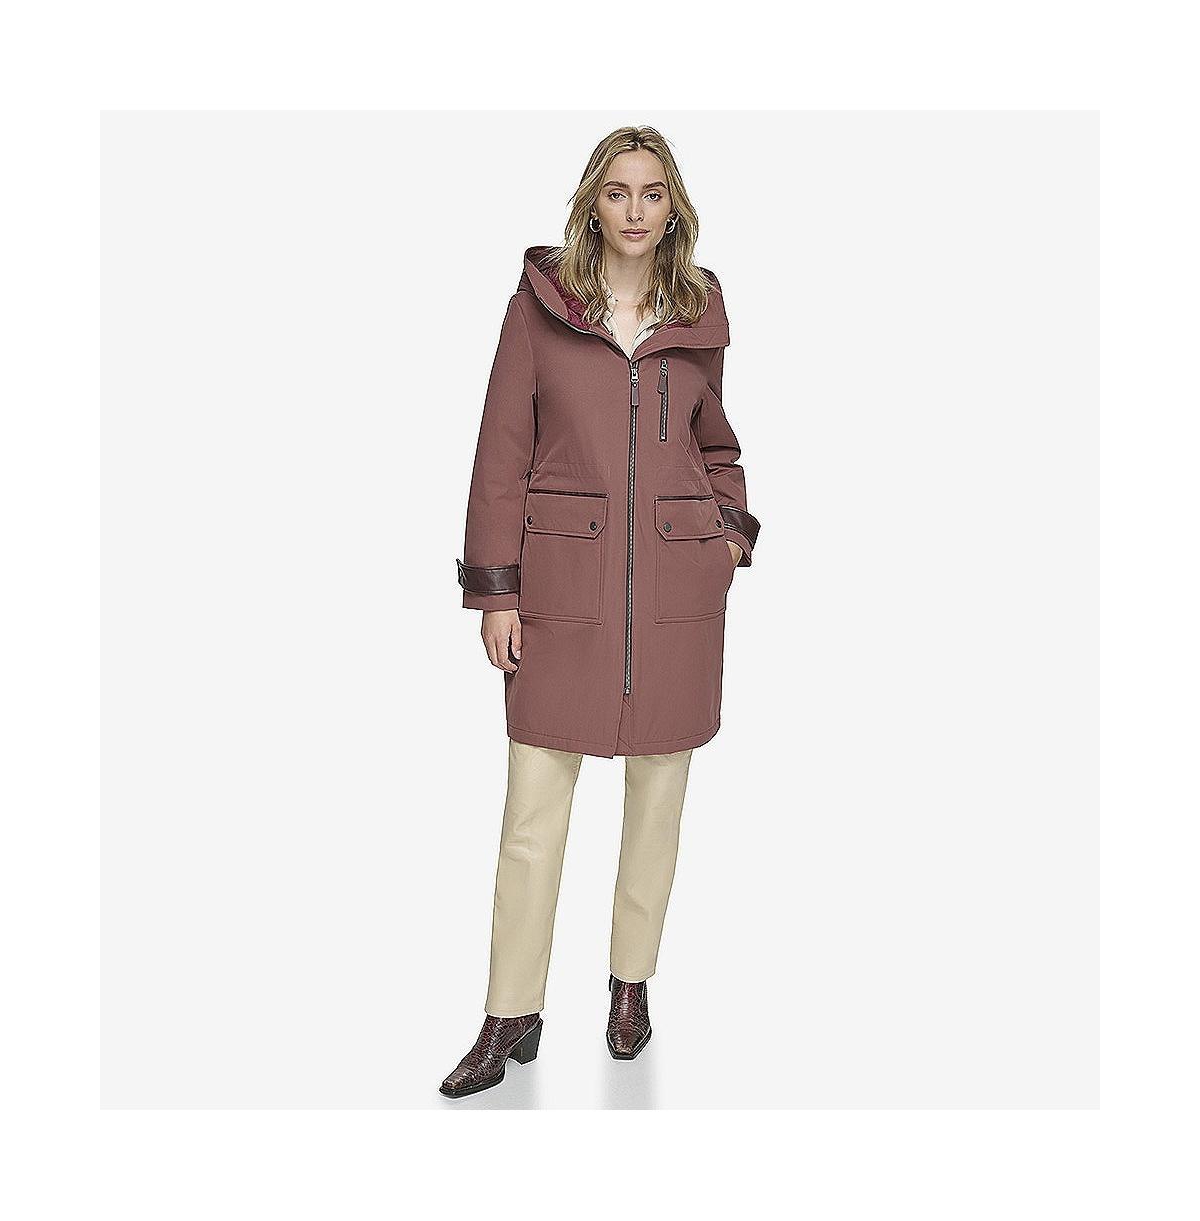 ANDREW MARC WOMEN'S GEMAS LIGHTWEIGHT PARKA COAT WITH MATTE SHELL AND FAUX LEATHER DETAILS